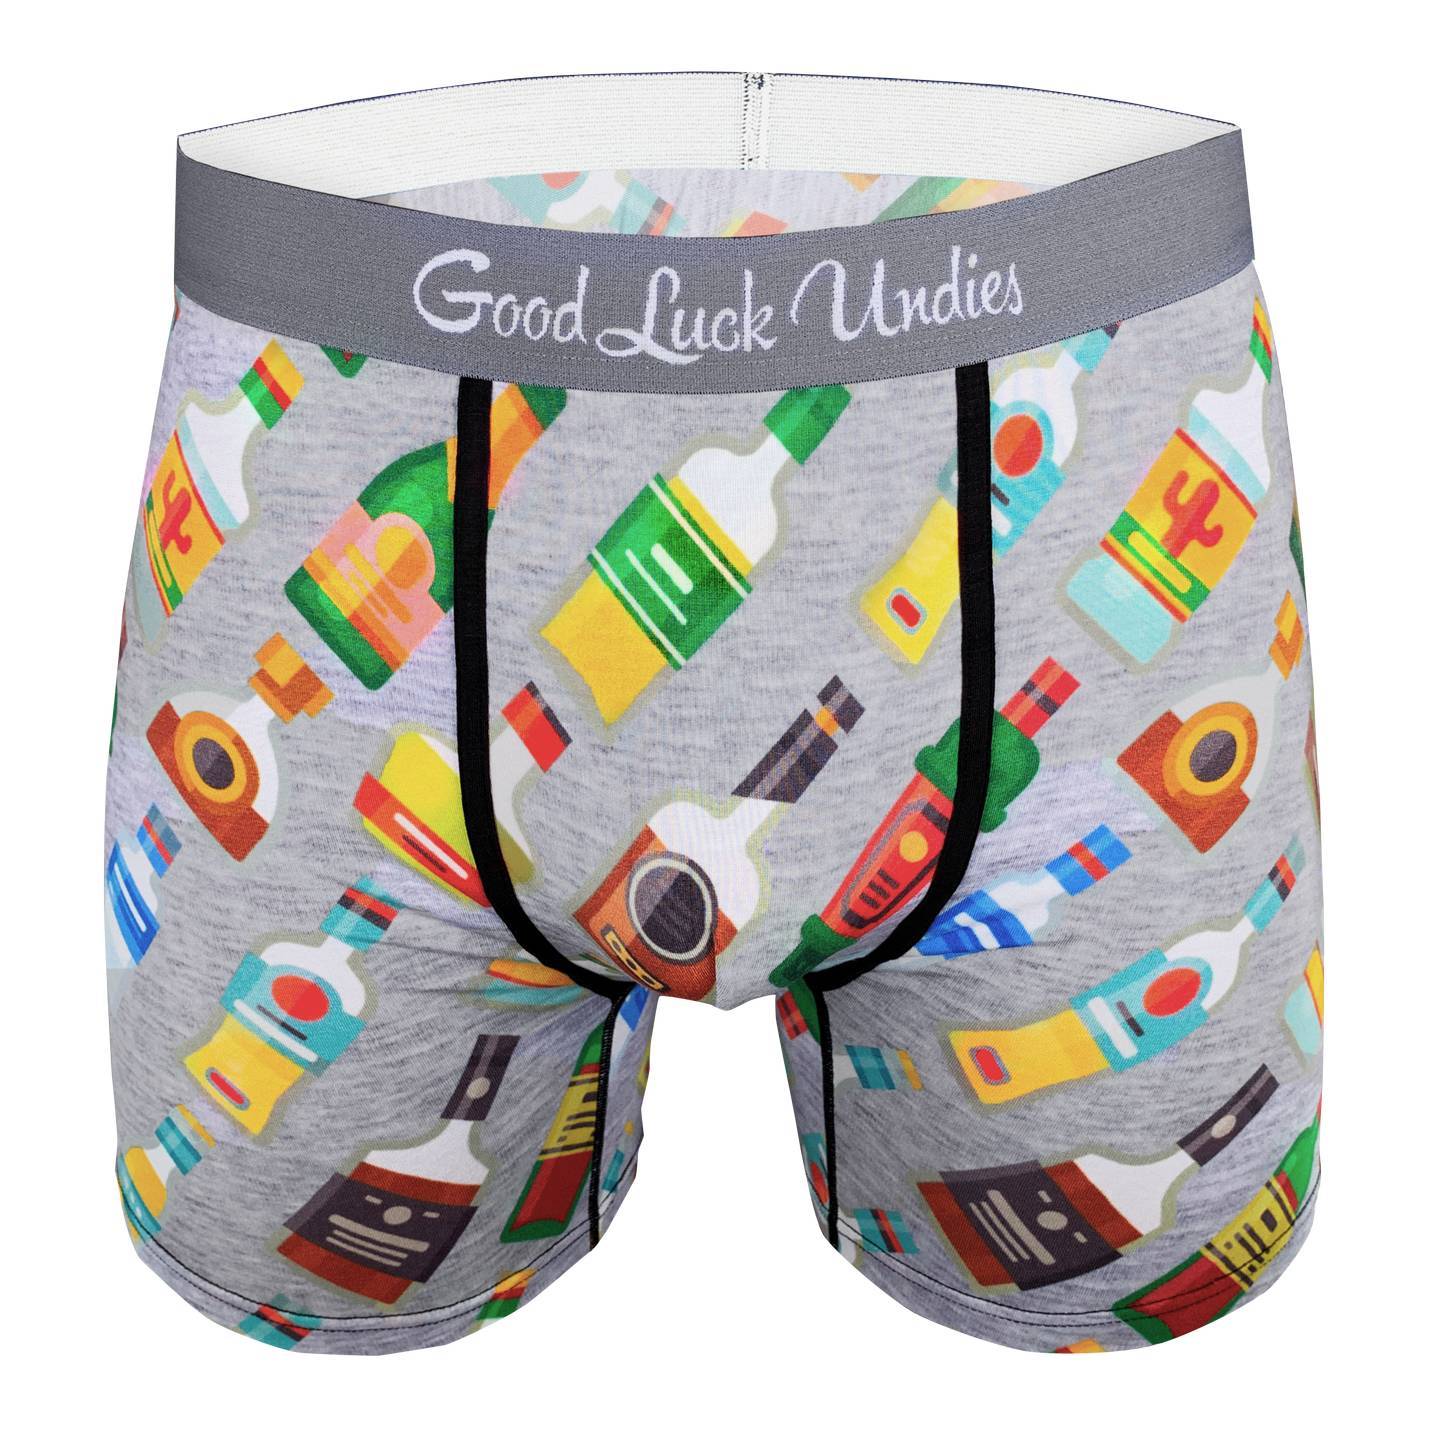 MEN'S RICK AND MORTY UNDERWEAR